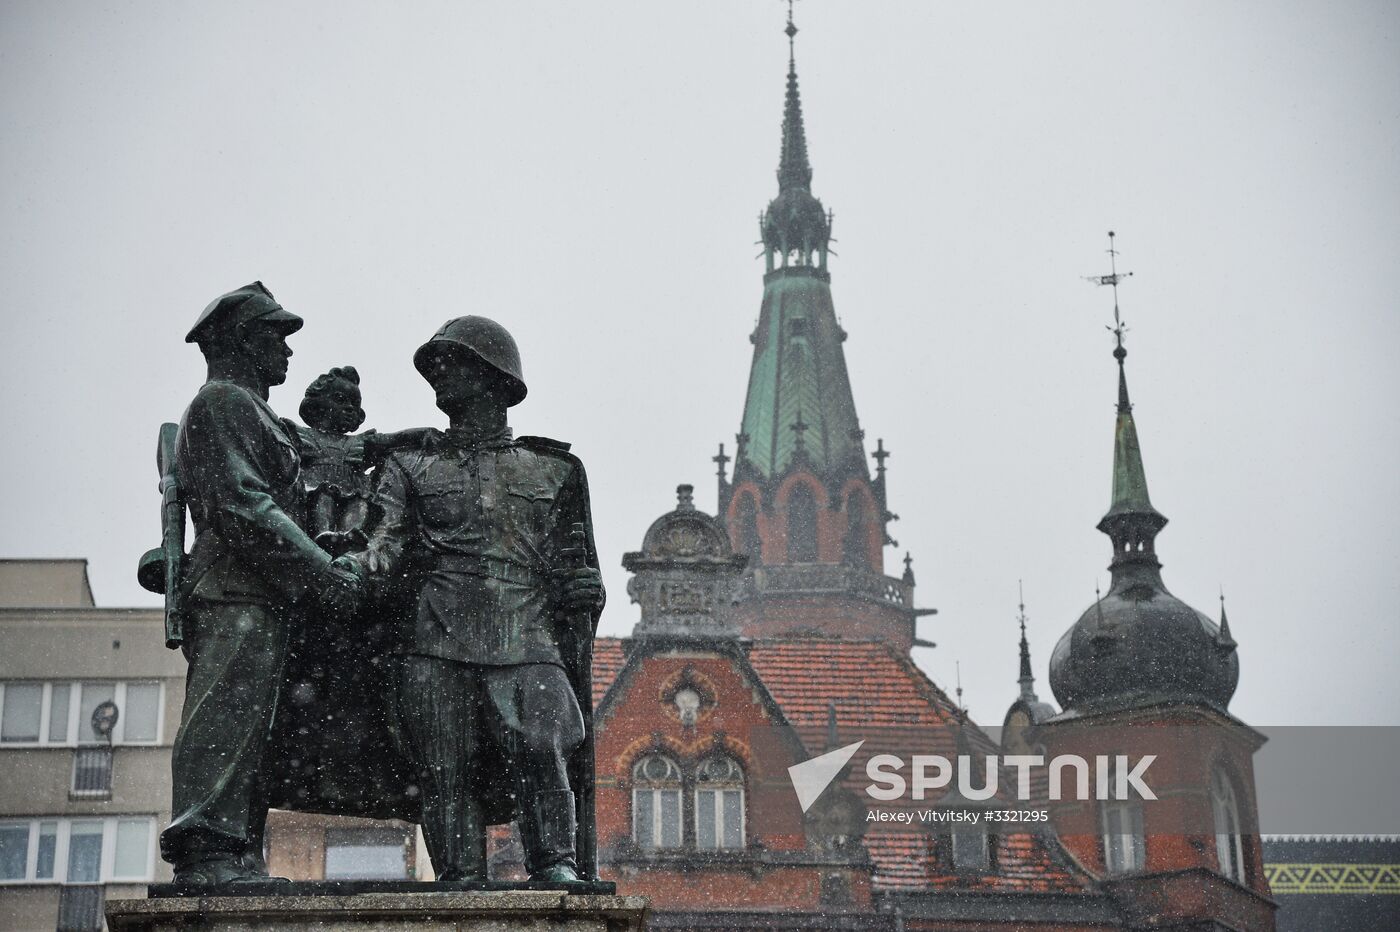 Monuments to Soviet soldiers in Poland